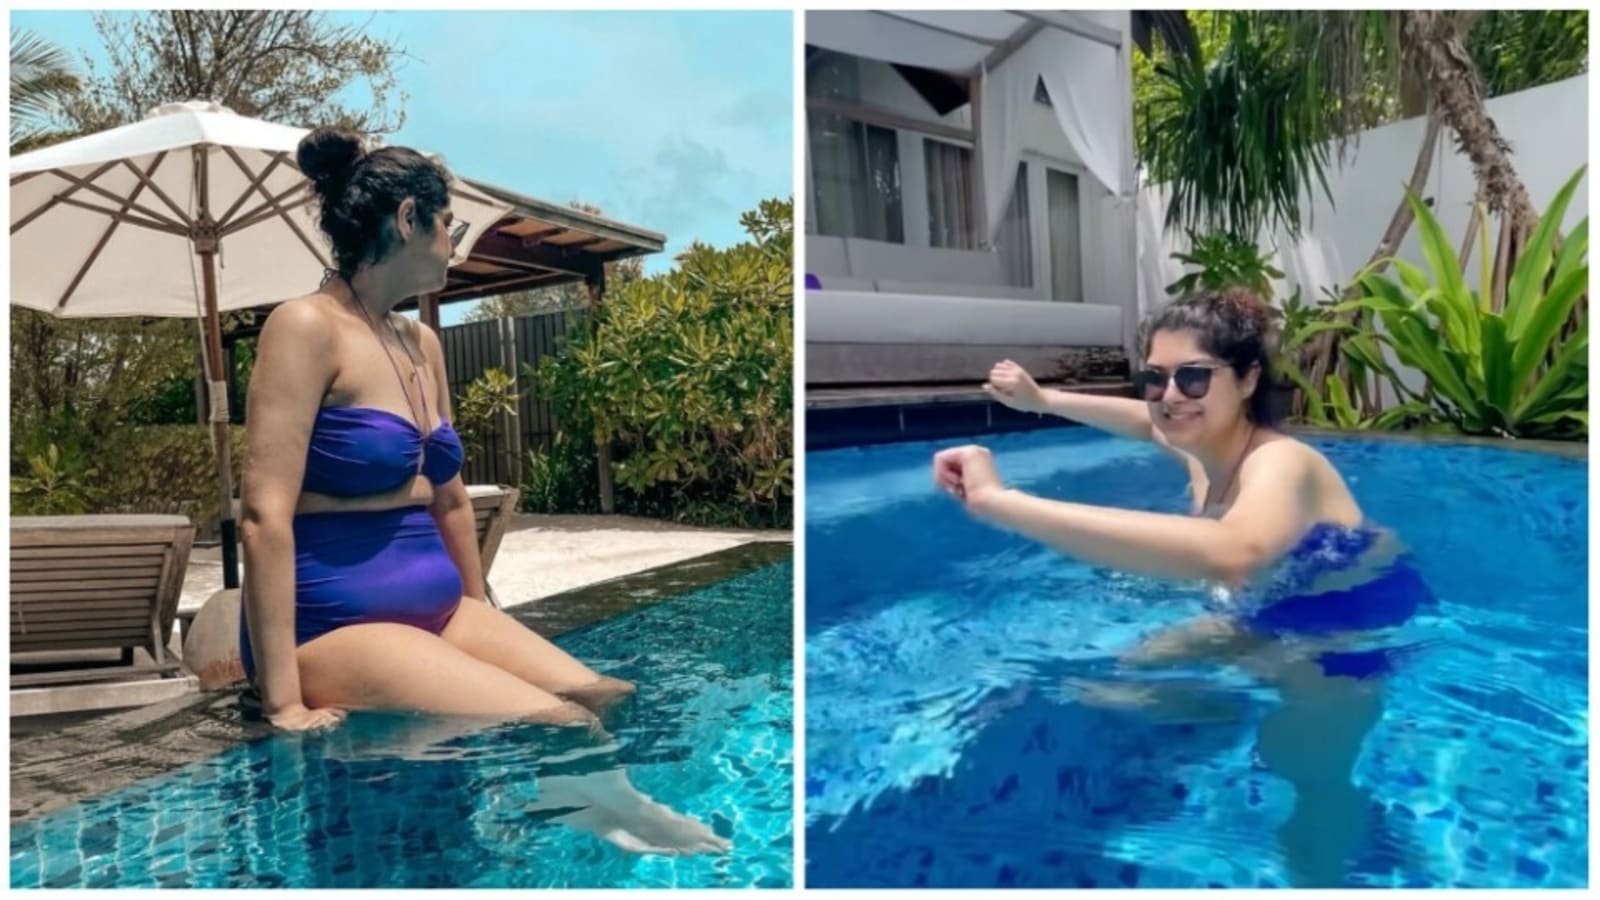 Anshula Kapoor wears bikini on holiday after hesitating initially: ‘Skin is meant to fold and roll’